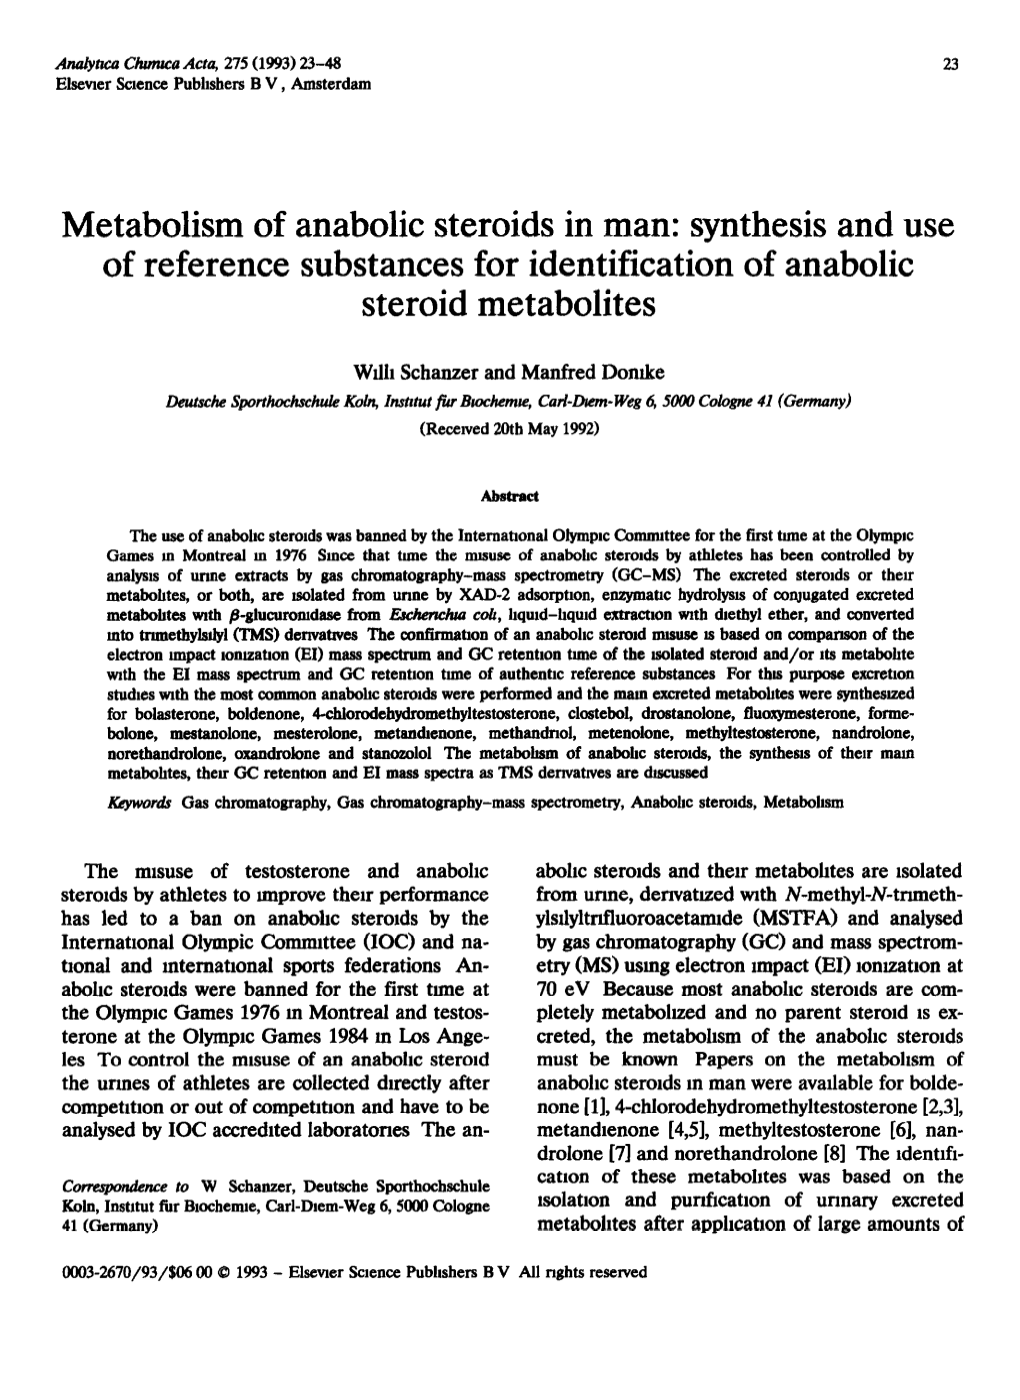 Metabolism of Anabolic Steroids in Man: Synthesis and Use of Reference Substances for Identification of Anabolic Steroid Metabolites